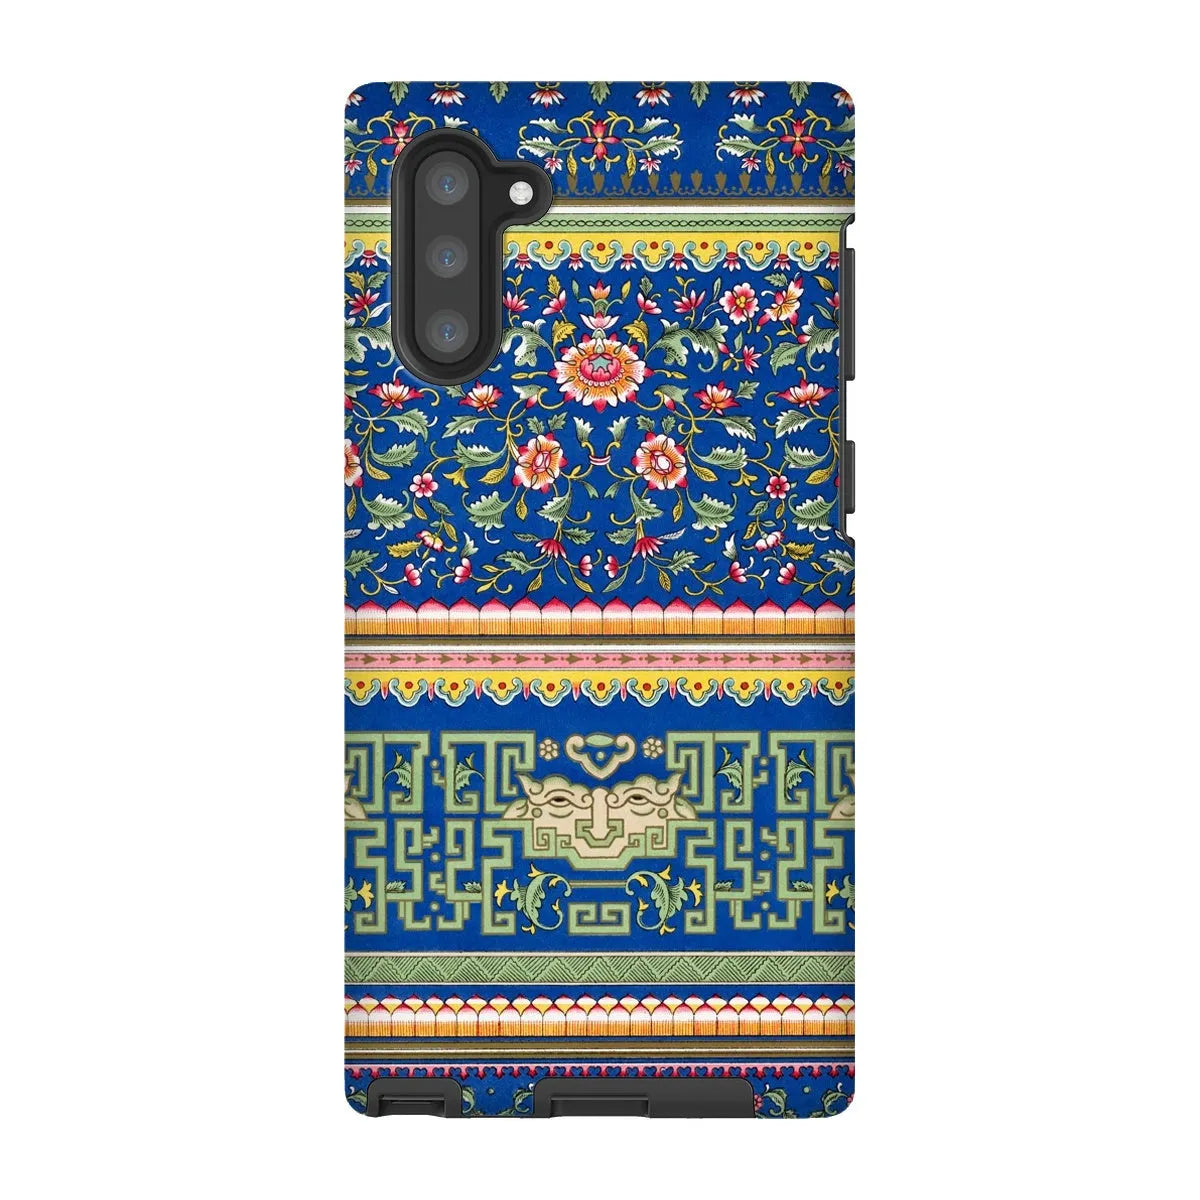 Chinese Aesthetic Pattern Art Phone Case - Owen Jones - Samsung Galaxy Note 10 / Matte - Mobile Phone Cases - Aesthetic